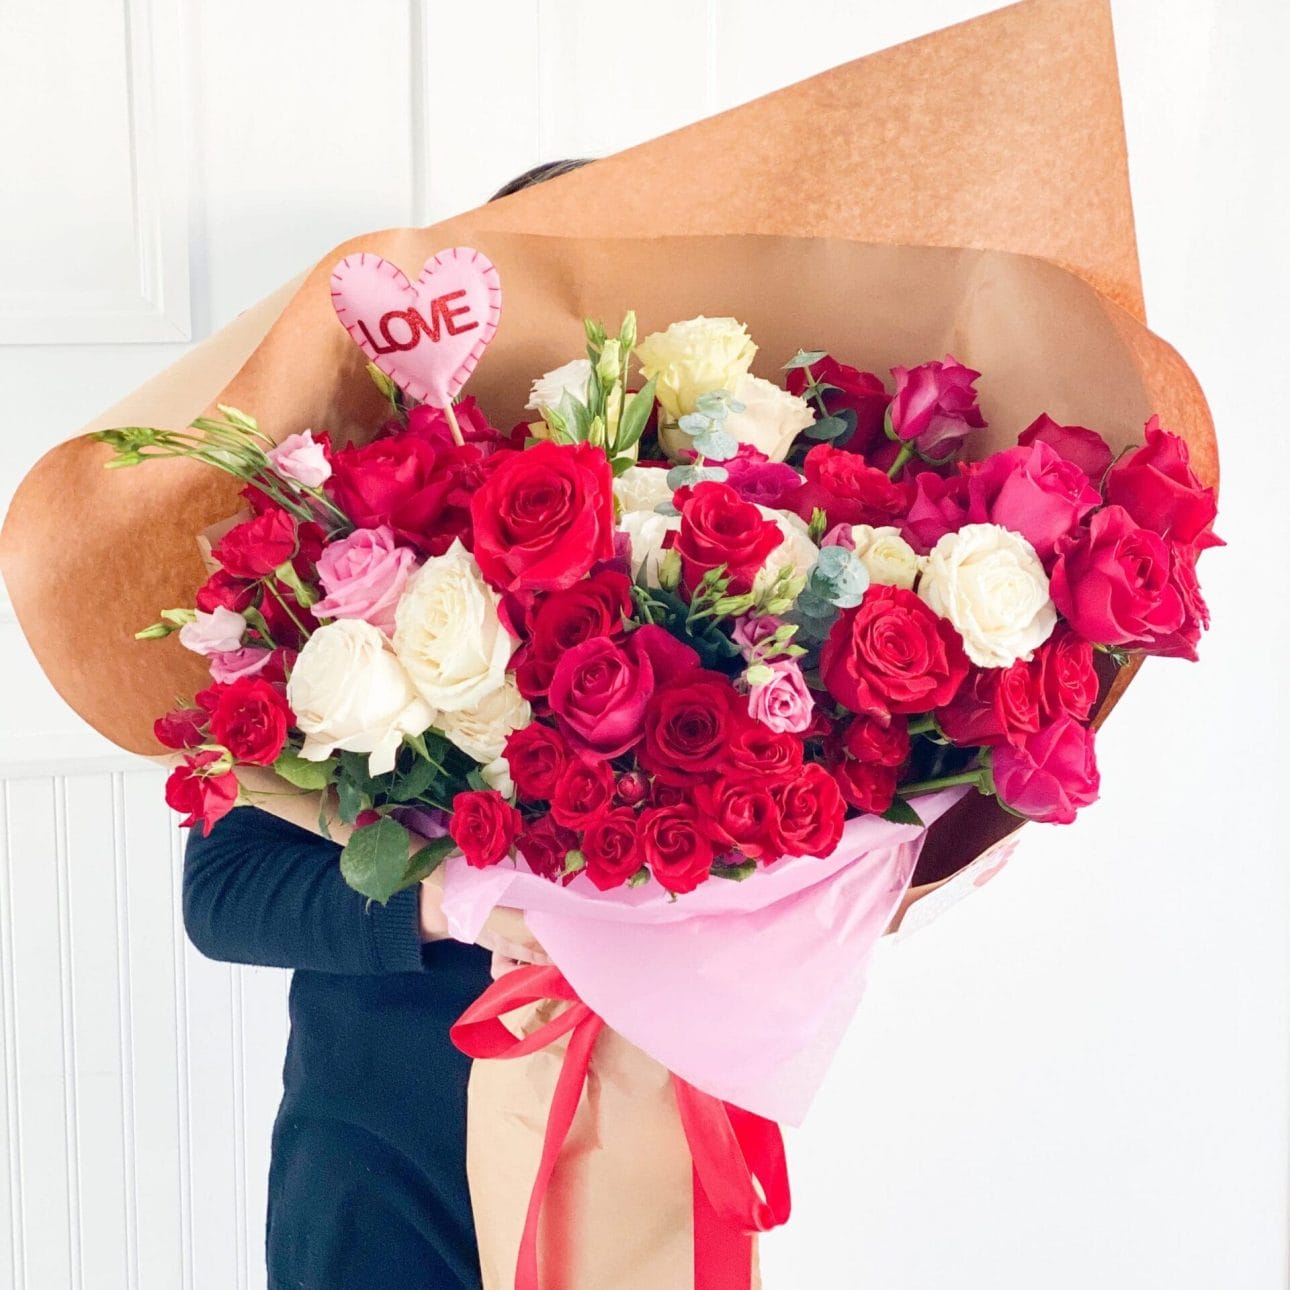 floralbash toronto flower7 scaled 1 5 Best Toronto Flower Shops to Buy Valentine Flowers (Offering Delivery as Well)